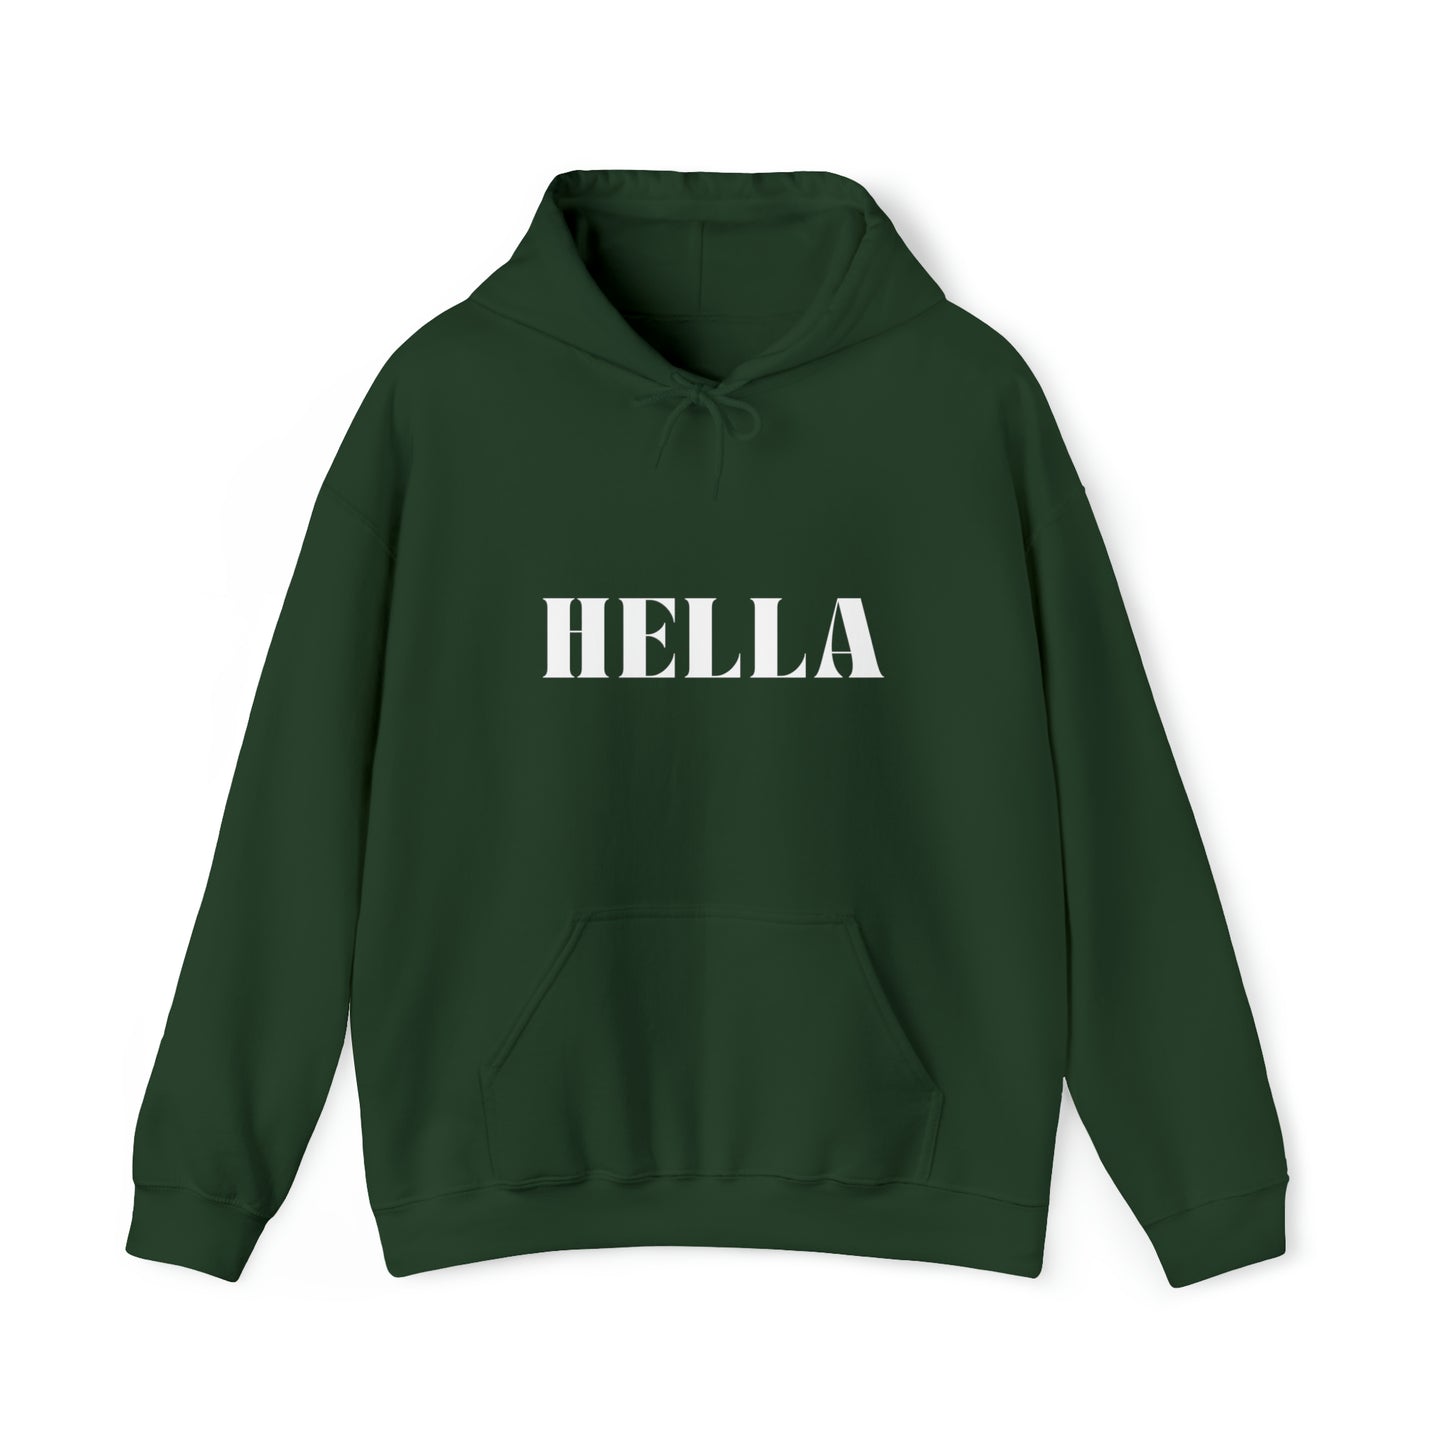 S Forest Green Hella Hoodie from HoodySZN.com